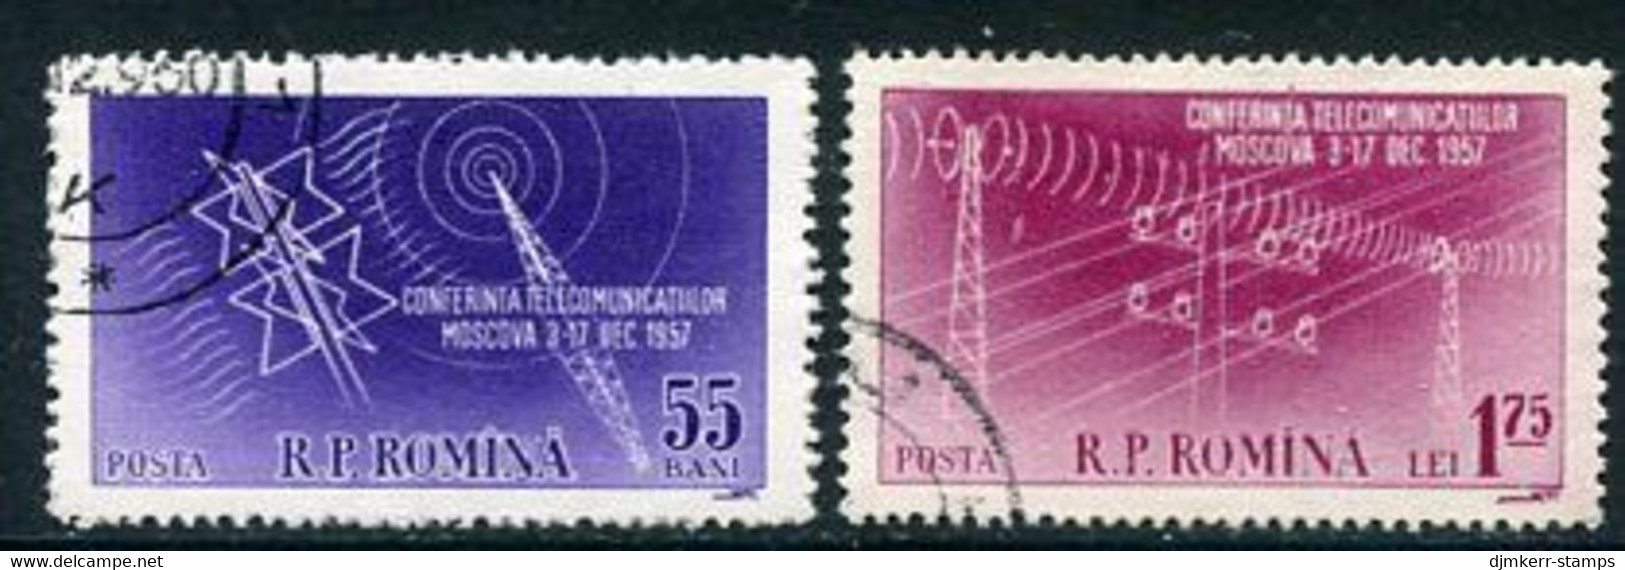 ROMANIA 1958 Postal Ministers' Conference  Used.  Michel 1699-700 - Usado